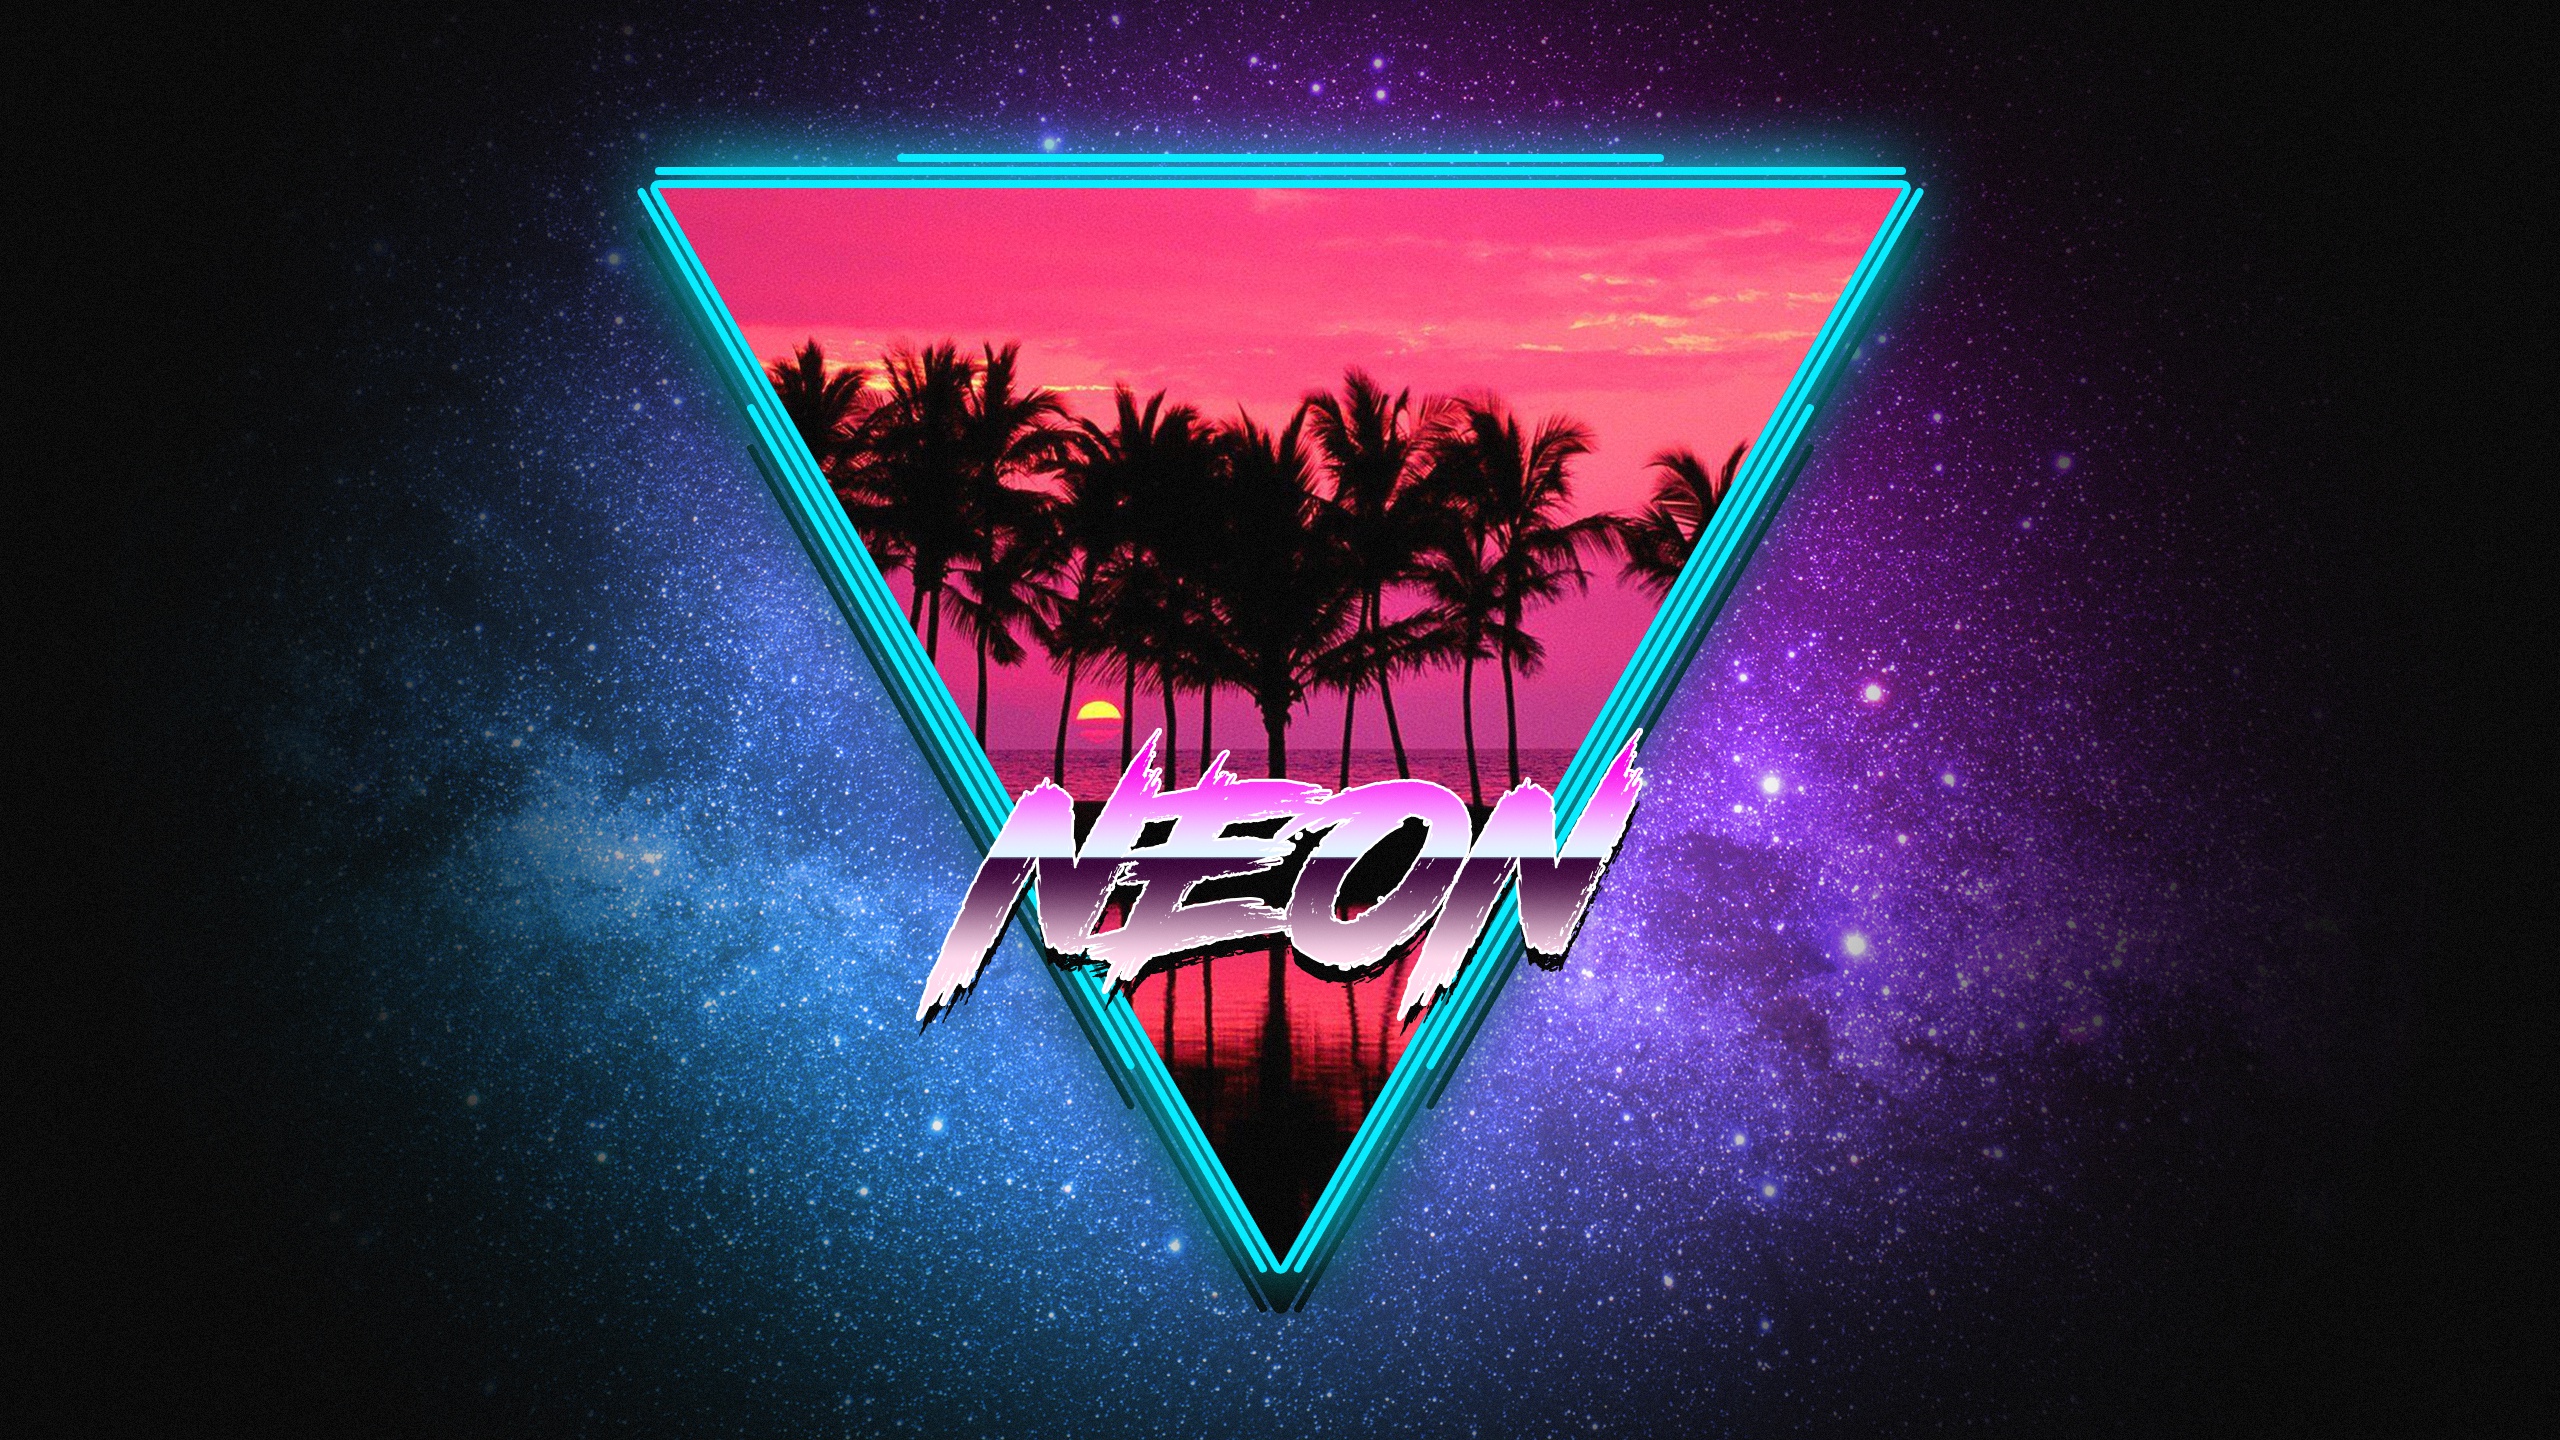 Neon Synthwave Retrowave Art Wallpapers | Wallpapers HD2560 x 1440